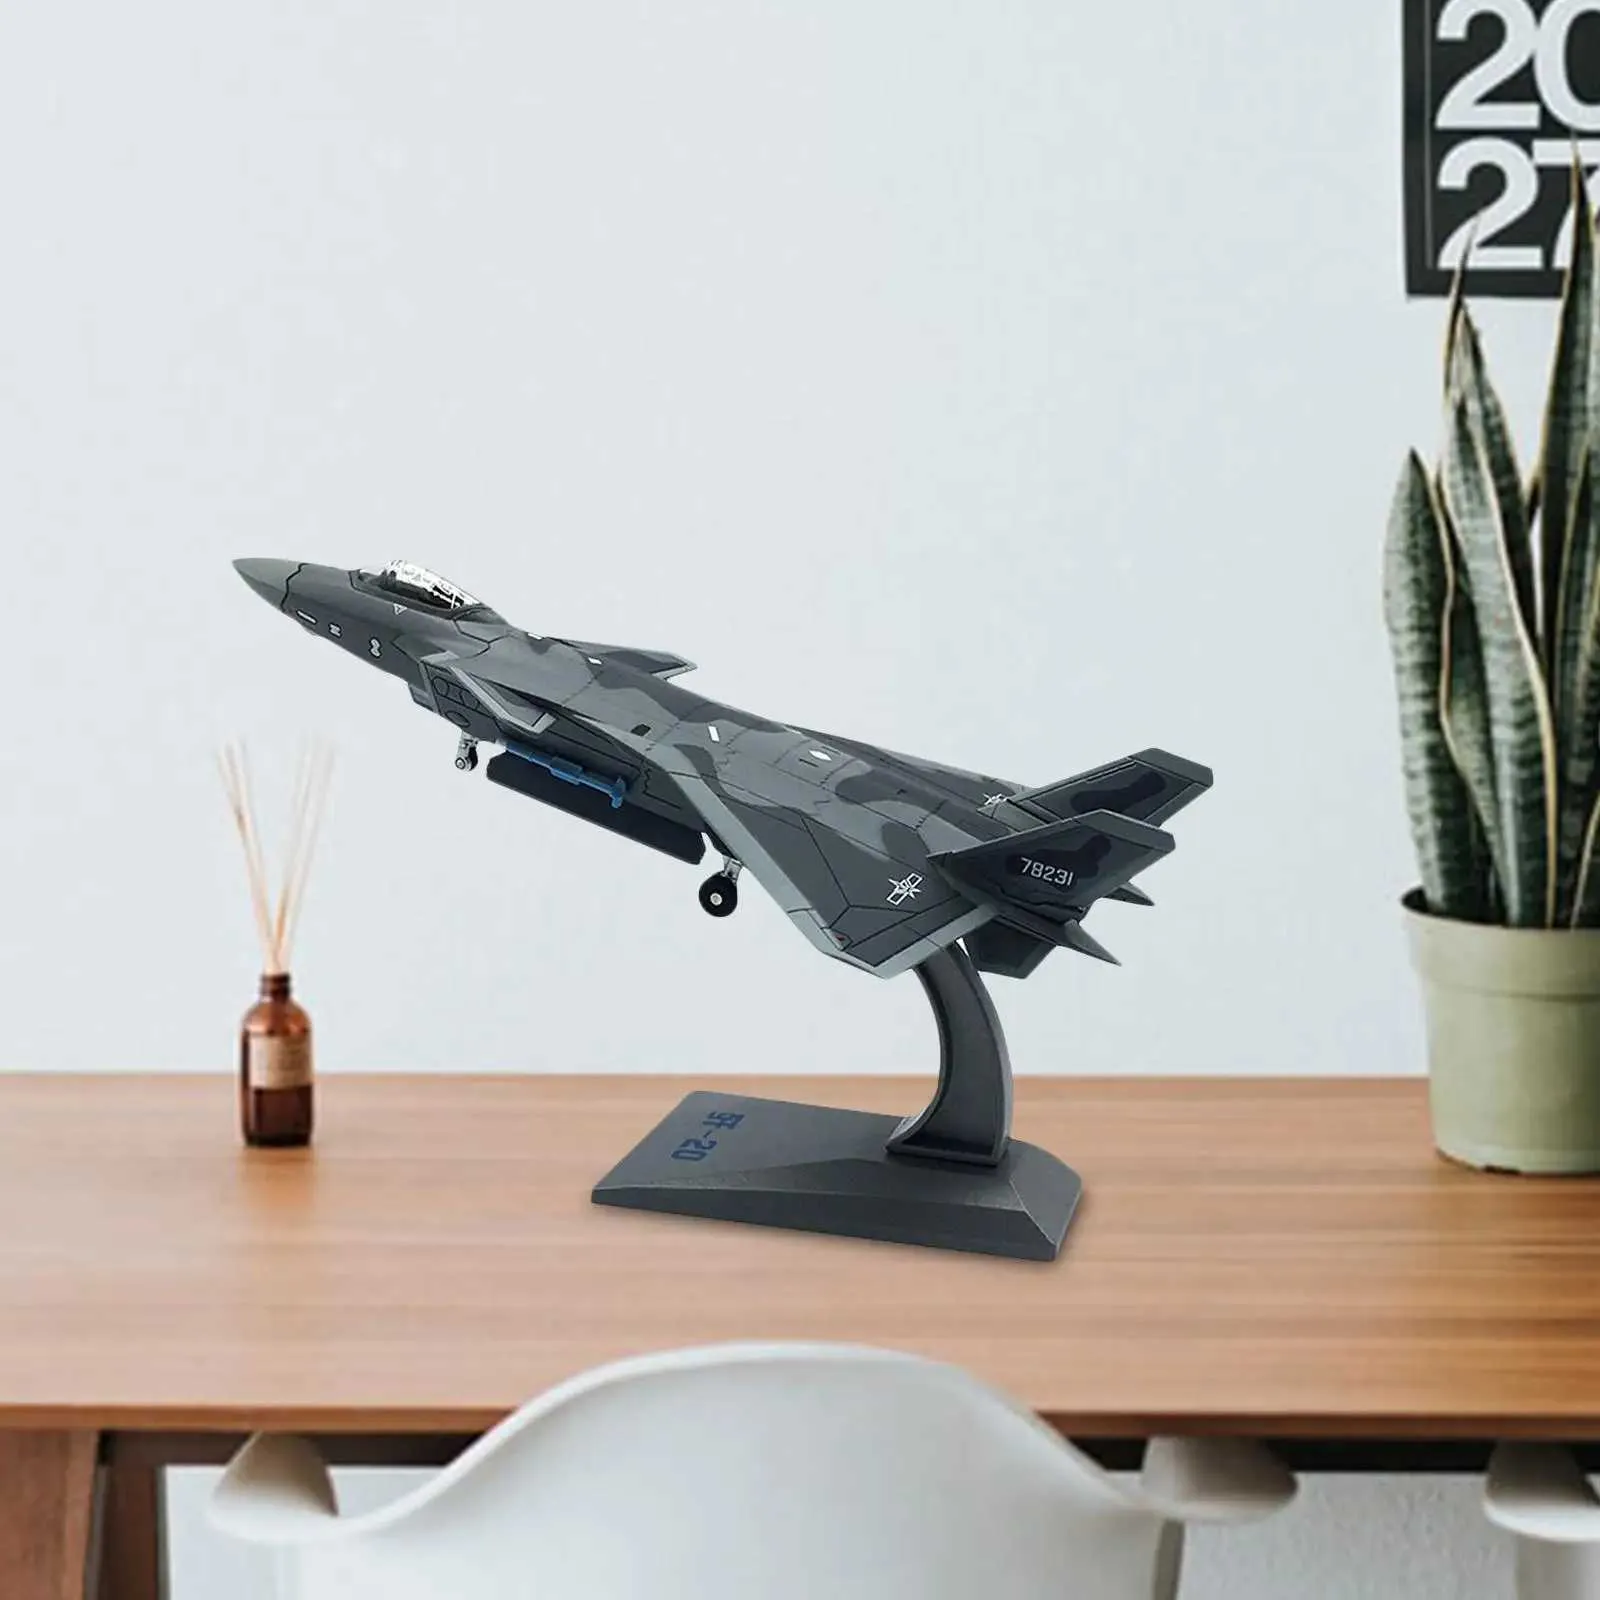 Aolly Diecast 1/100 Scale J-20 Fighter Airplane Diecast Model with Display Stand